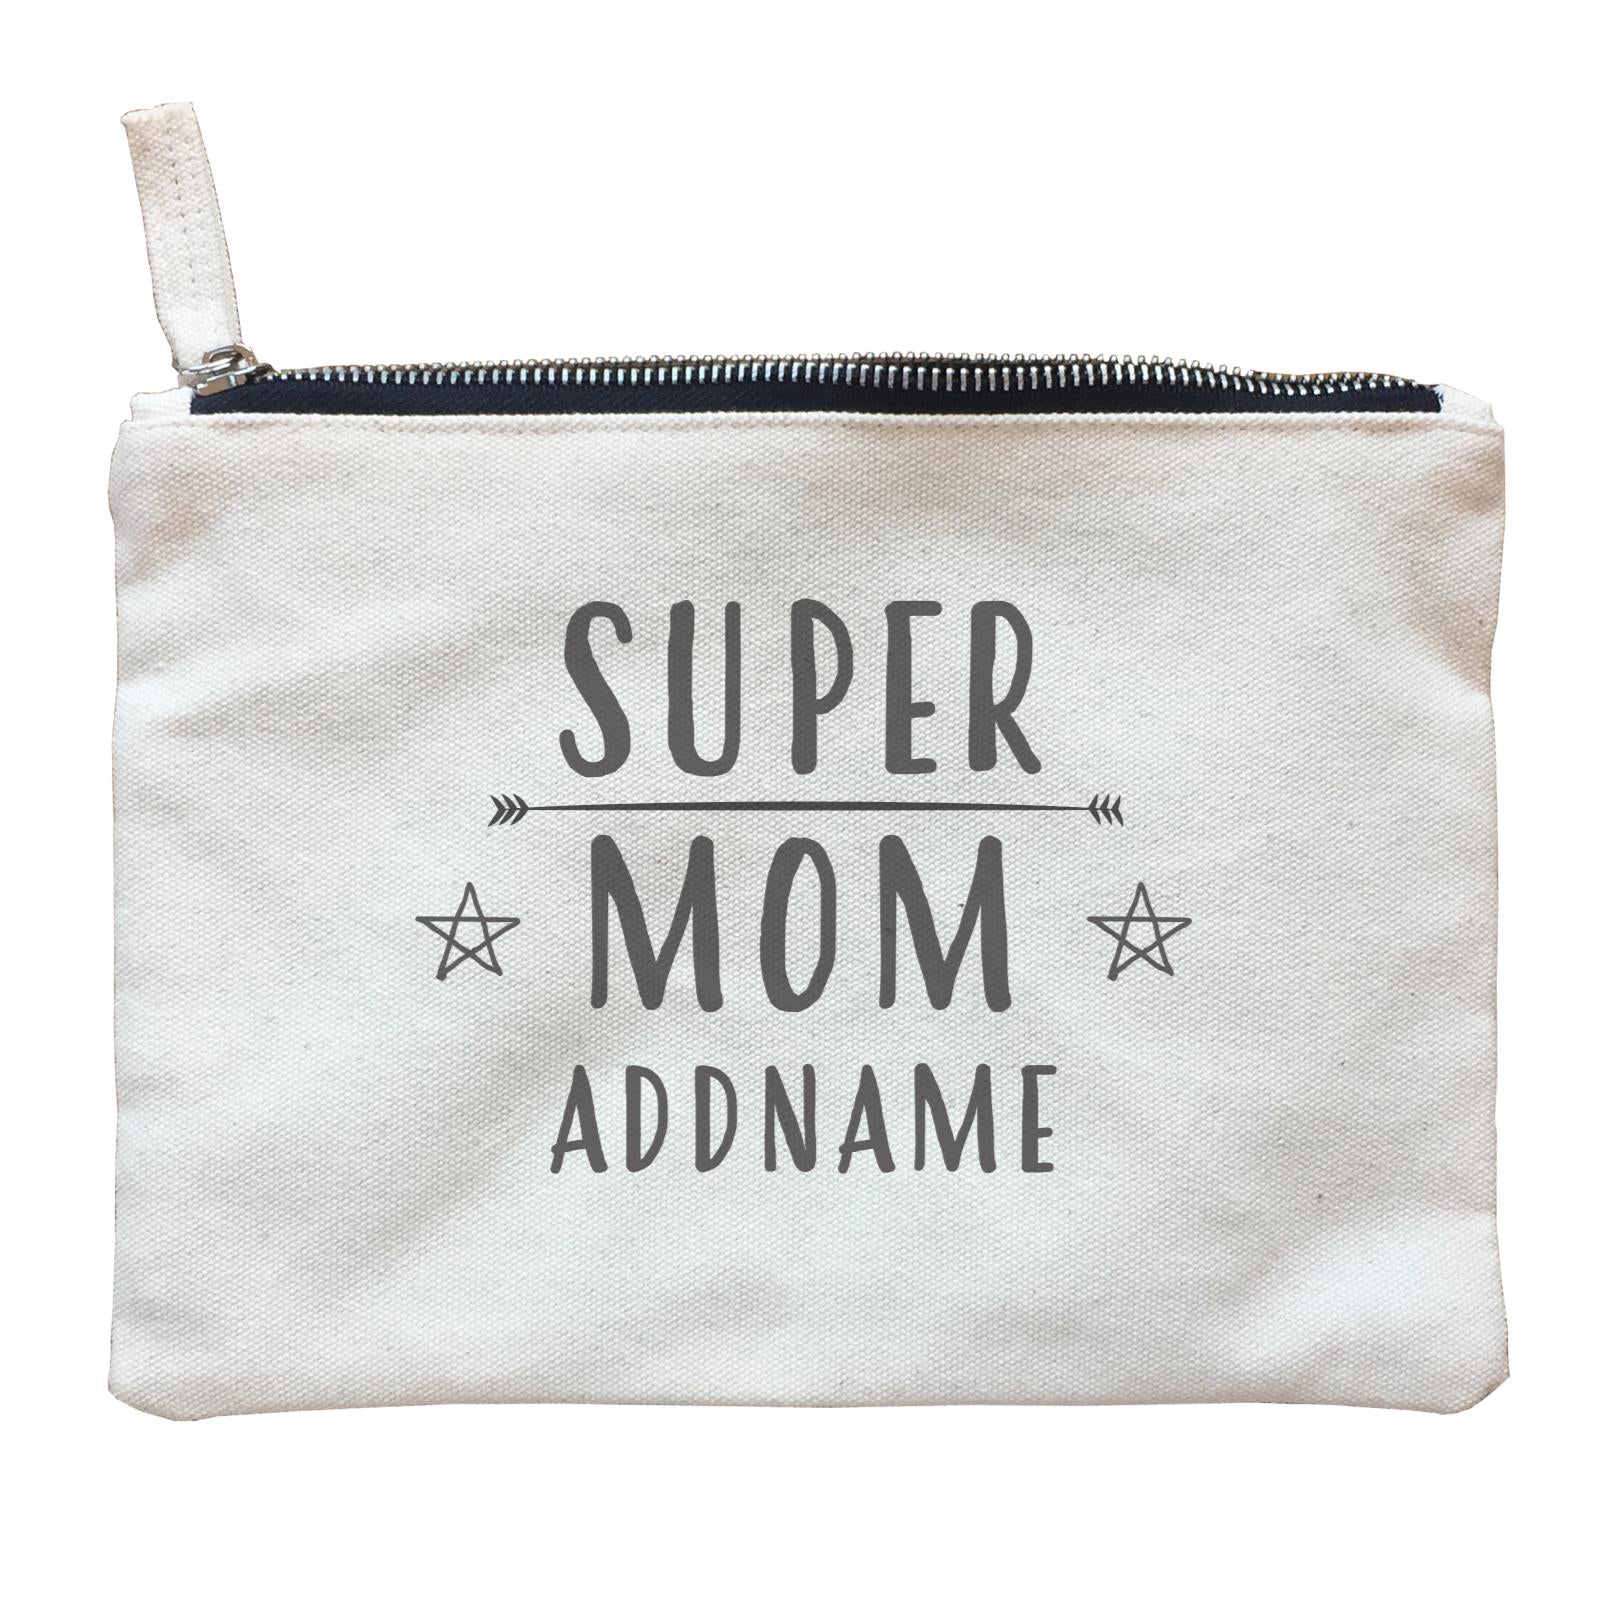 Girl Boss Quotes Super Mom Star Icon Addname Zipper Pouch